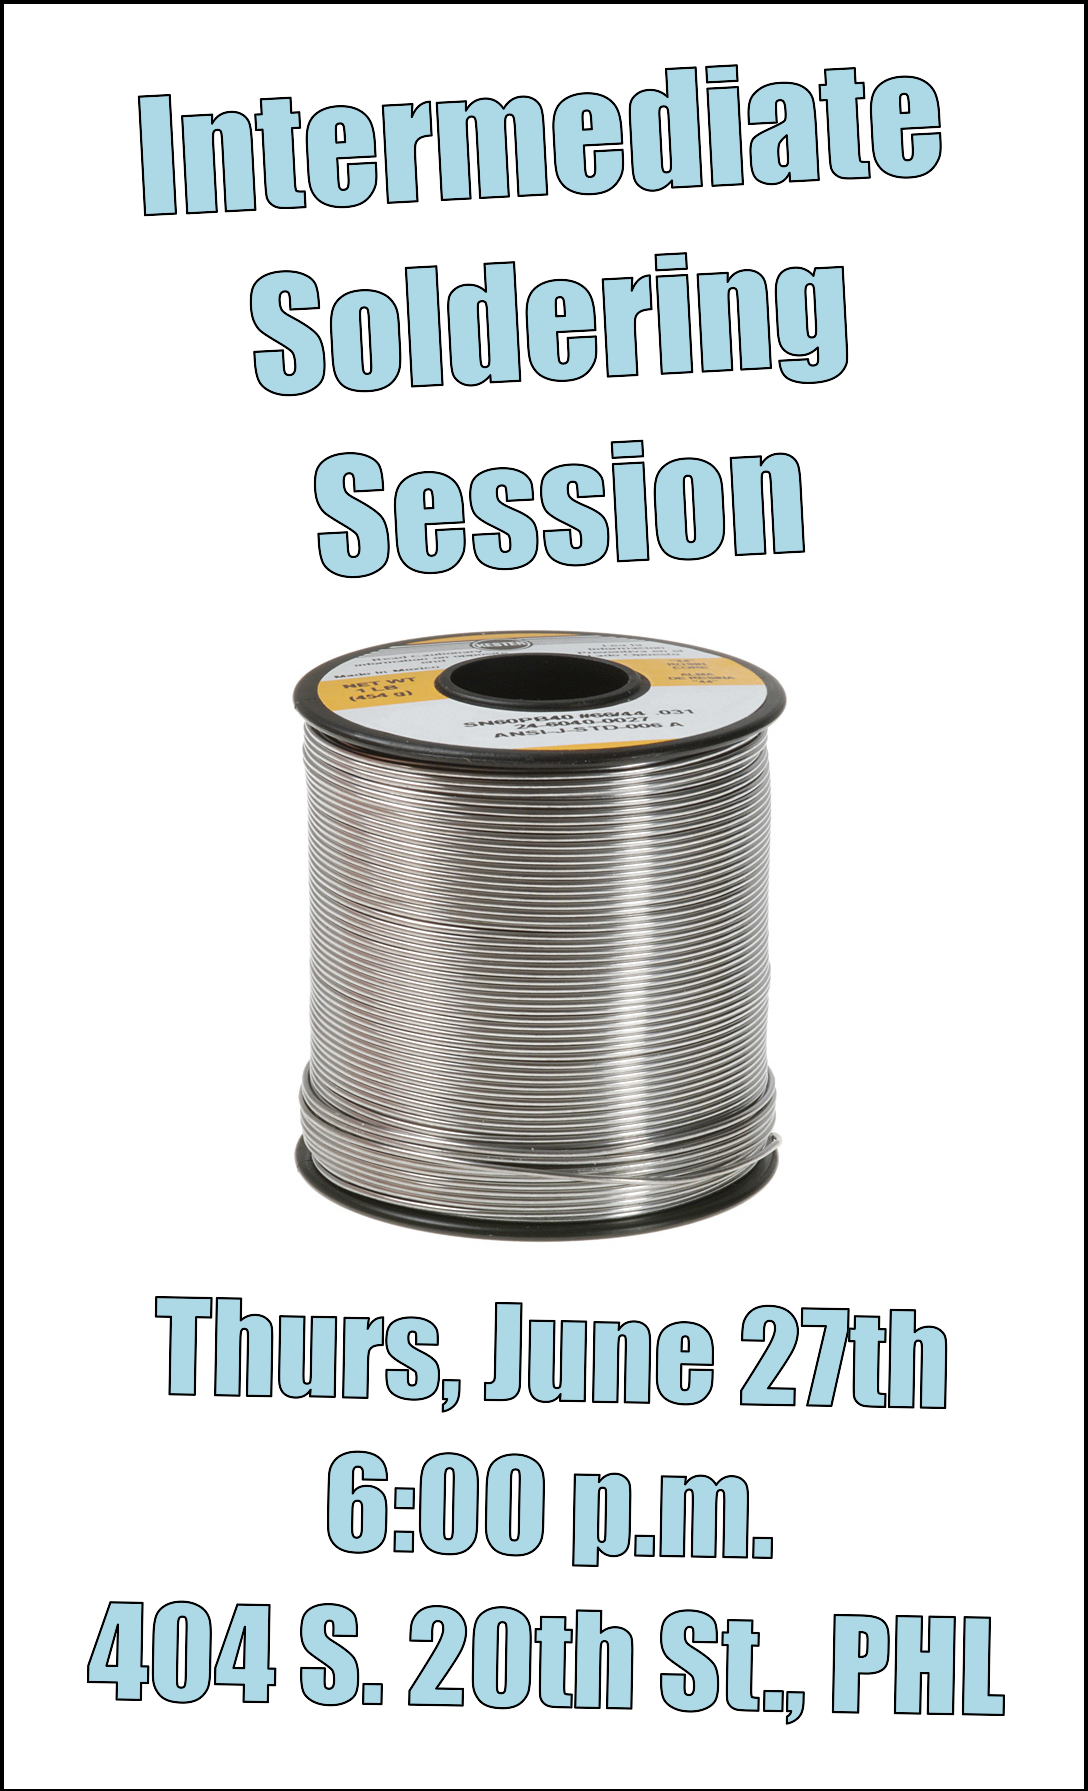 A photo of a large spool of solder with the following text: Intermediate Soldering Session Thurs, June 27th 6:00 p.m. 404 S. 20th St., PHL